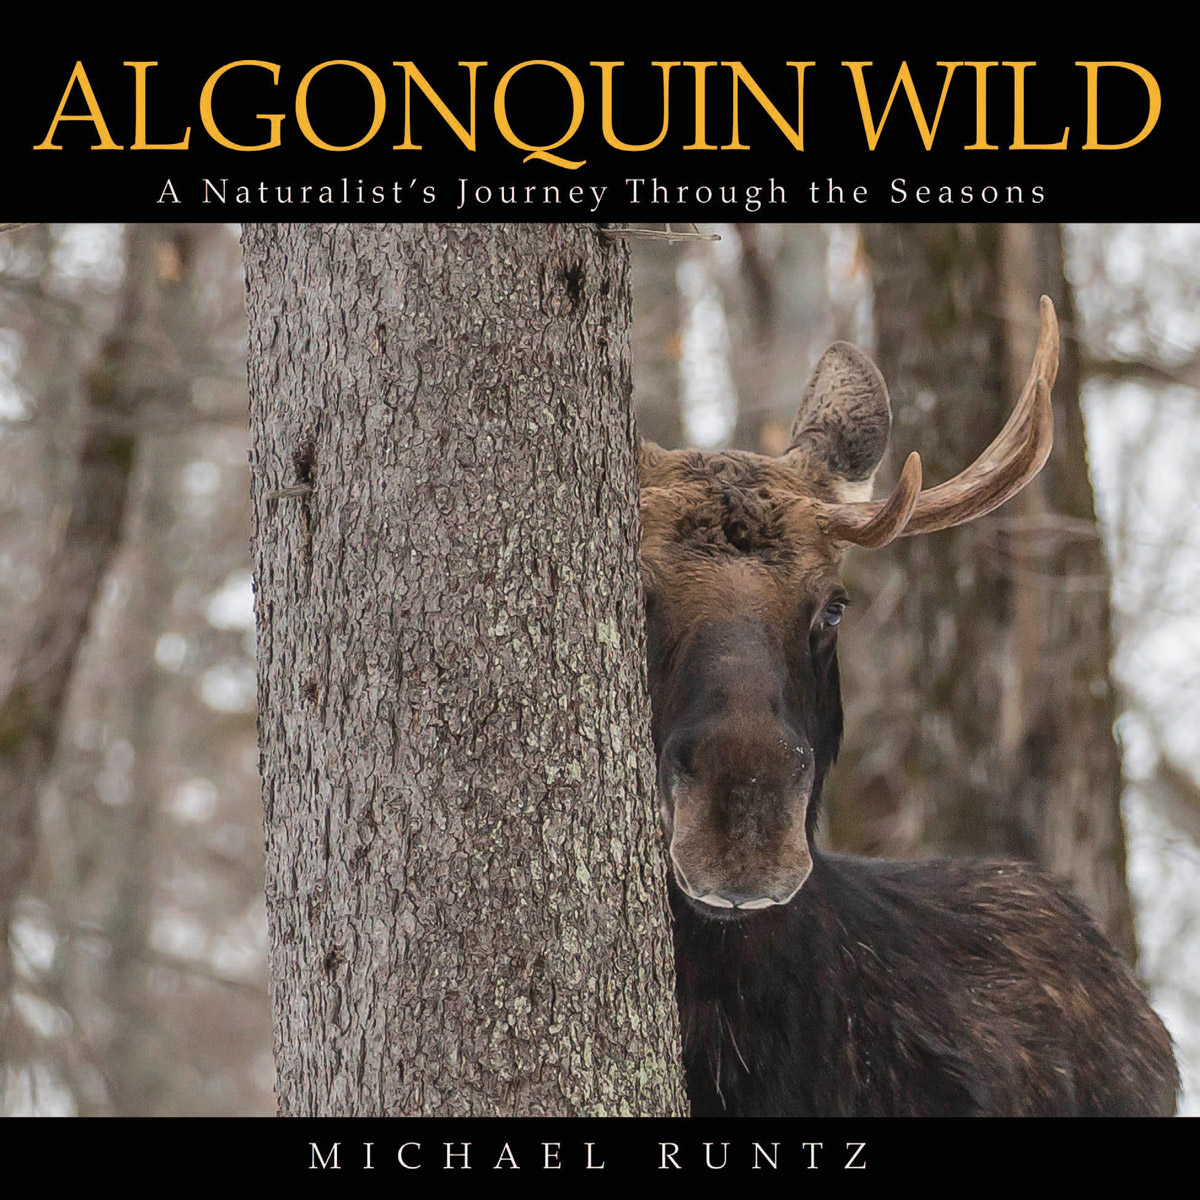 The cover of Algonquin Wild: A Naturalist’s Journey Through the Seasons, which features an image of a moose peeking out from behind a tree.